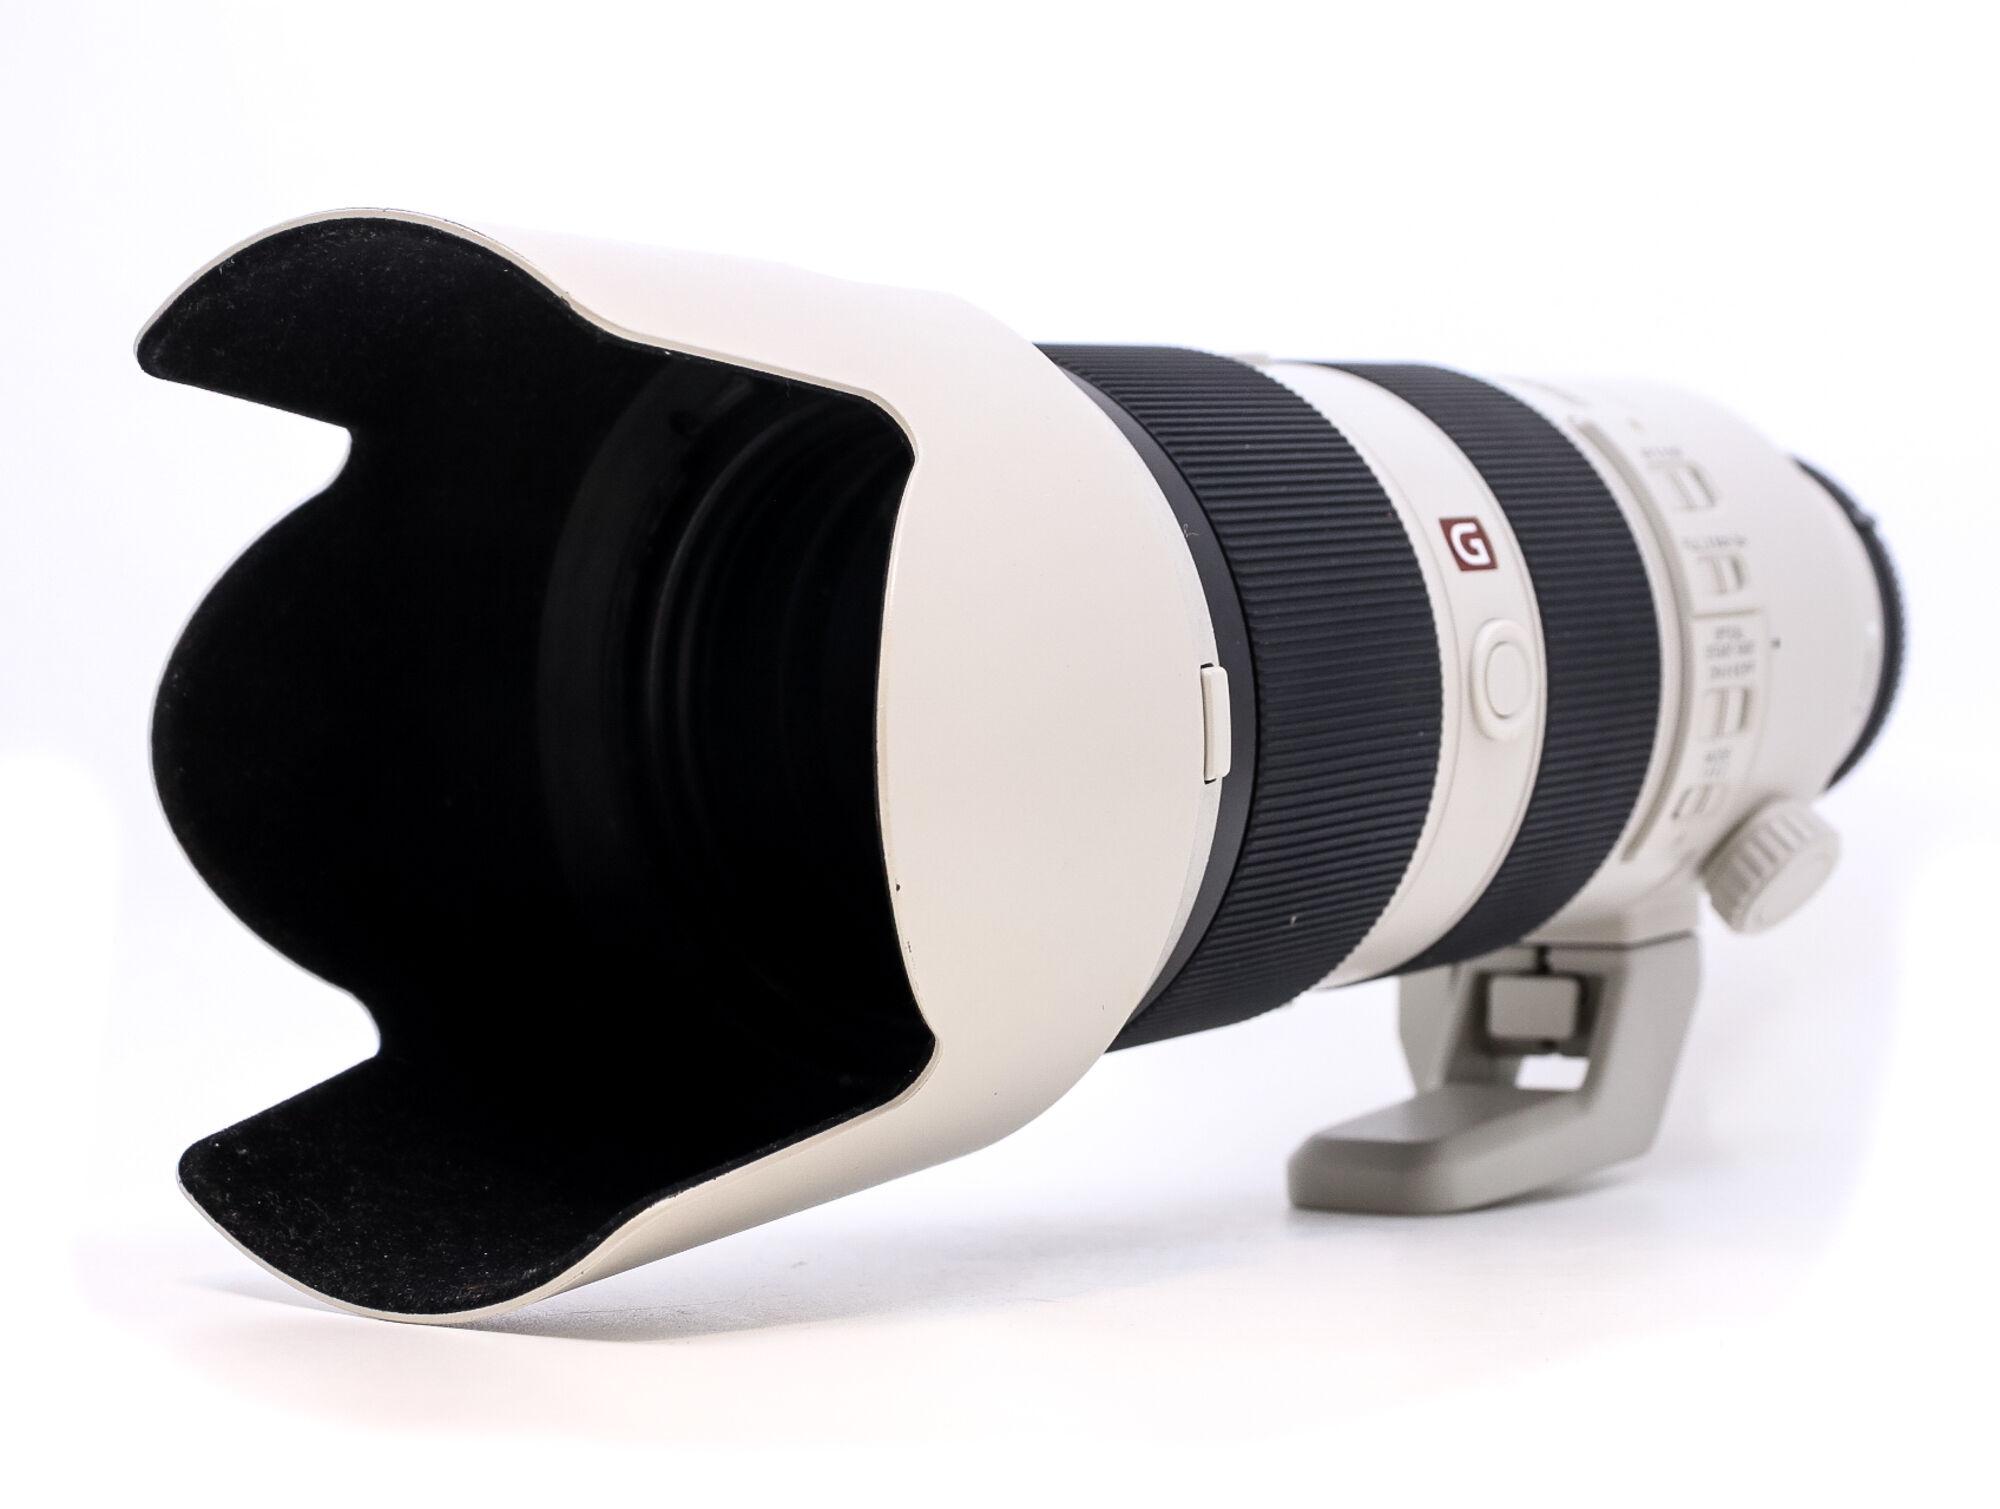 Sony FE 70-200mm f/2.8 GM OSS (Condition: Like New)